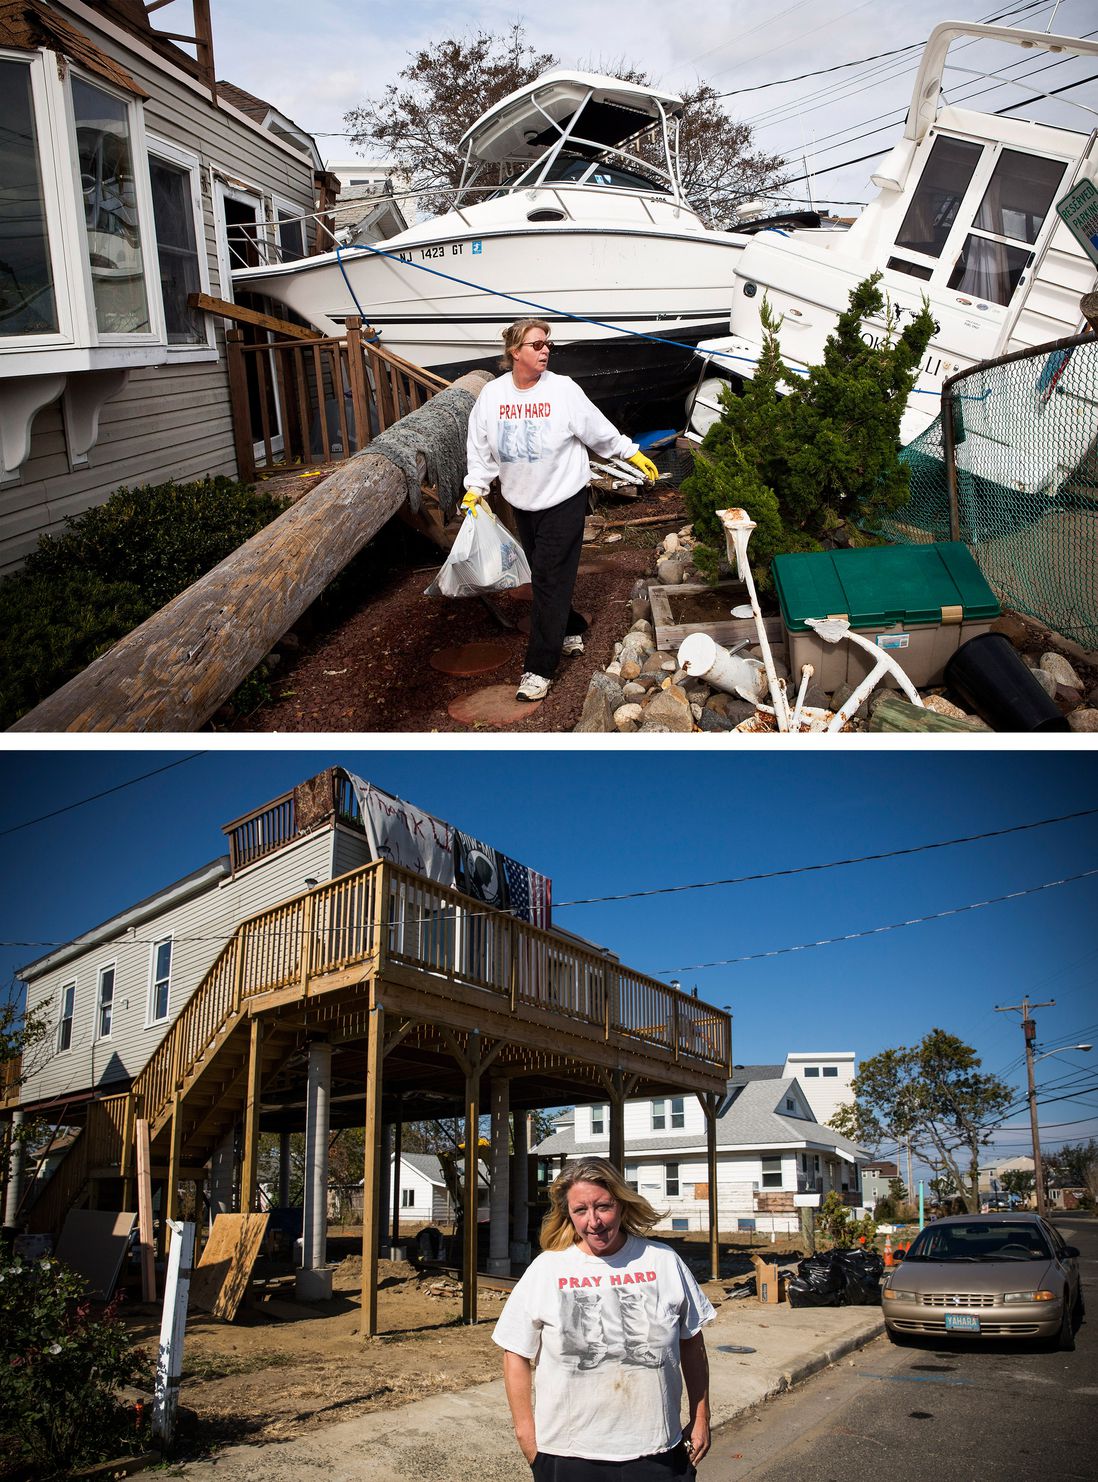 [Top] Regina Yahara-Splain cleans out her home after it was damaged by Superstorm Sandy on November 1, 2012 in Highlands, New Jersey. [Bottom] Almost one year later, Yahara-Splain poses for a portrait in front of the same home, which she has since raised on stilts to protect it from future storms, October 22, 2013.